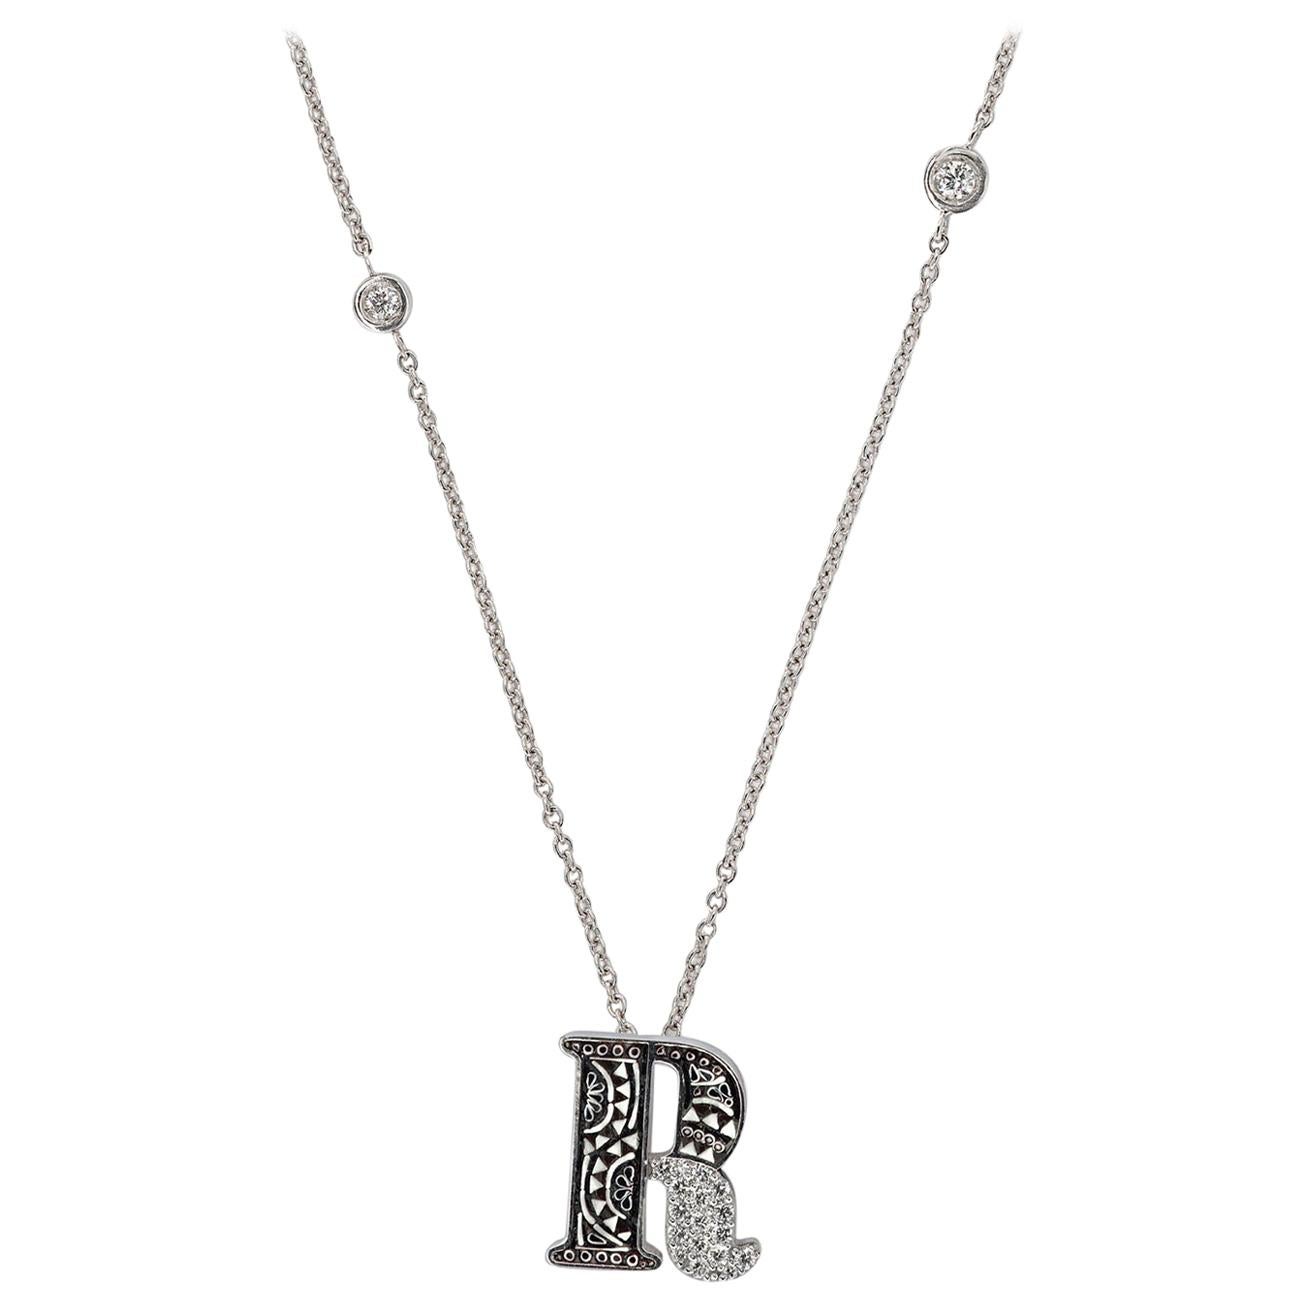 Necklace Letter R White Gold White Diamonds Hand Decorated with Micromosaic